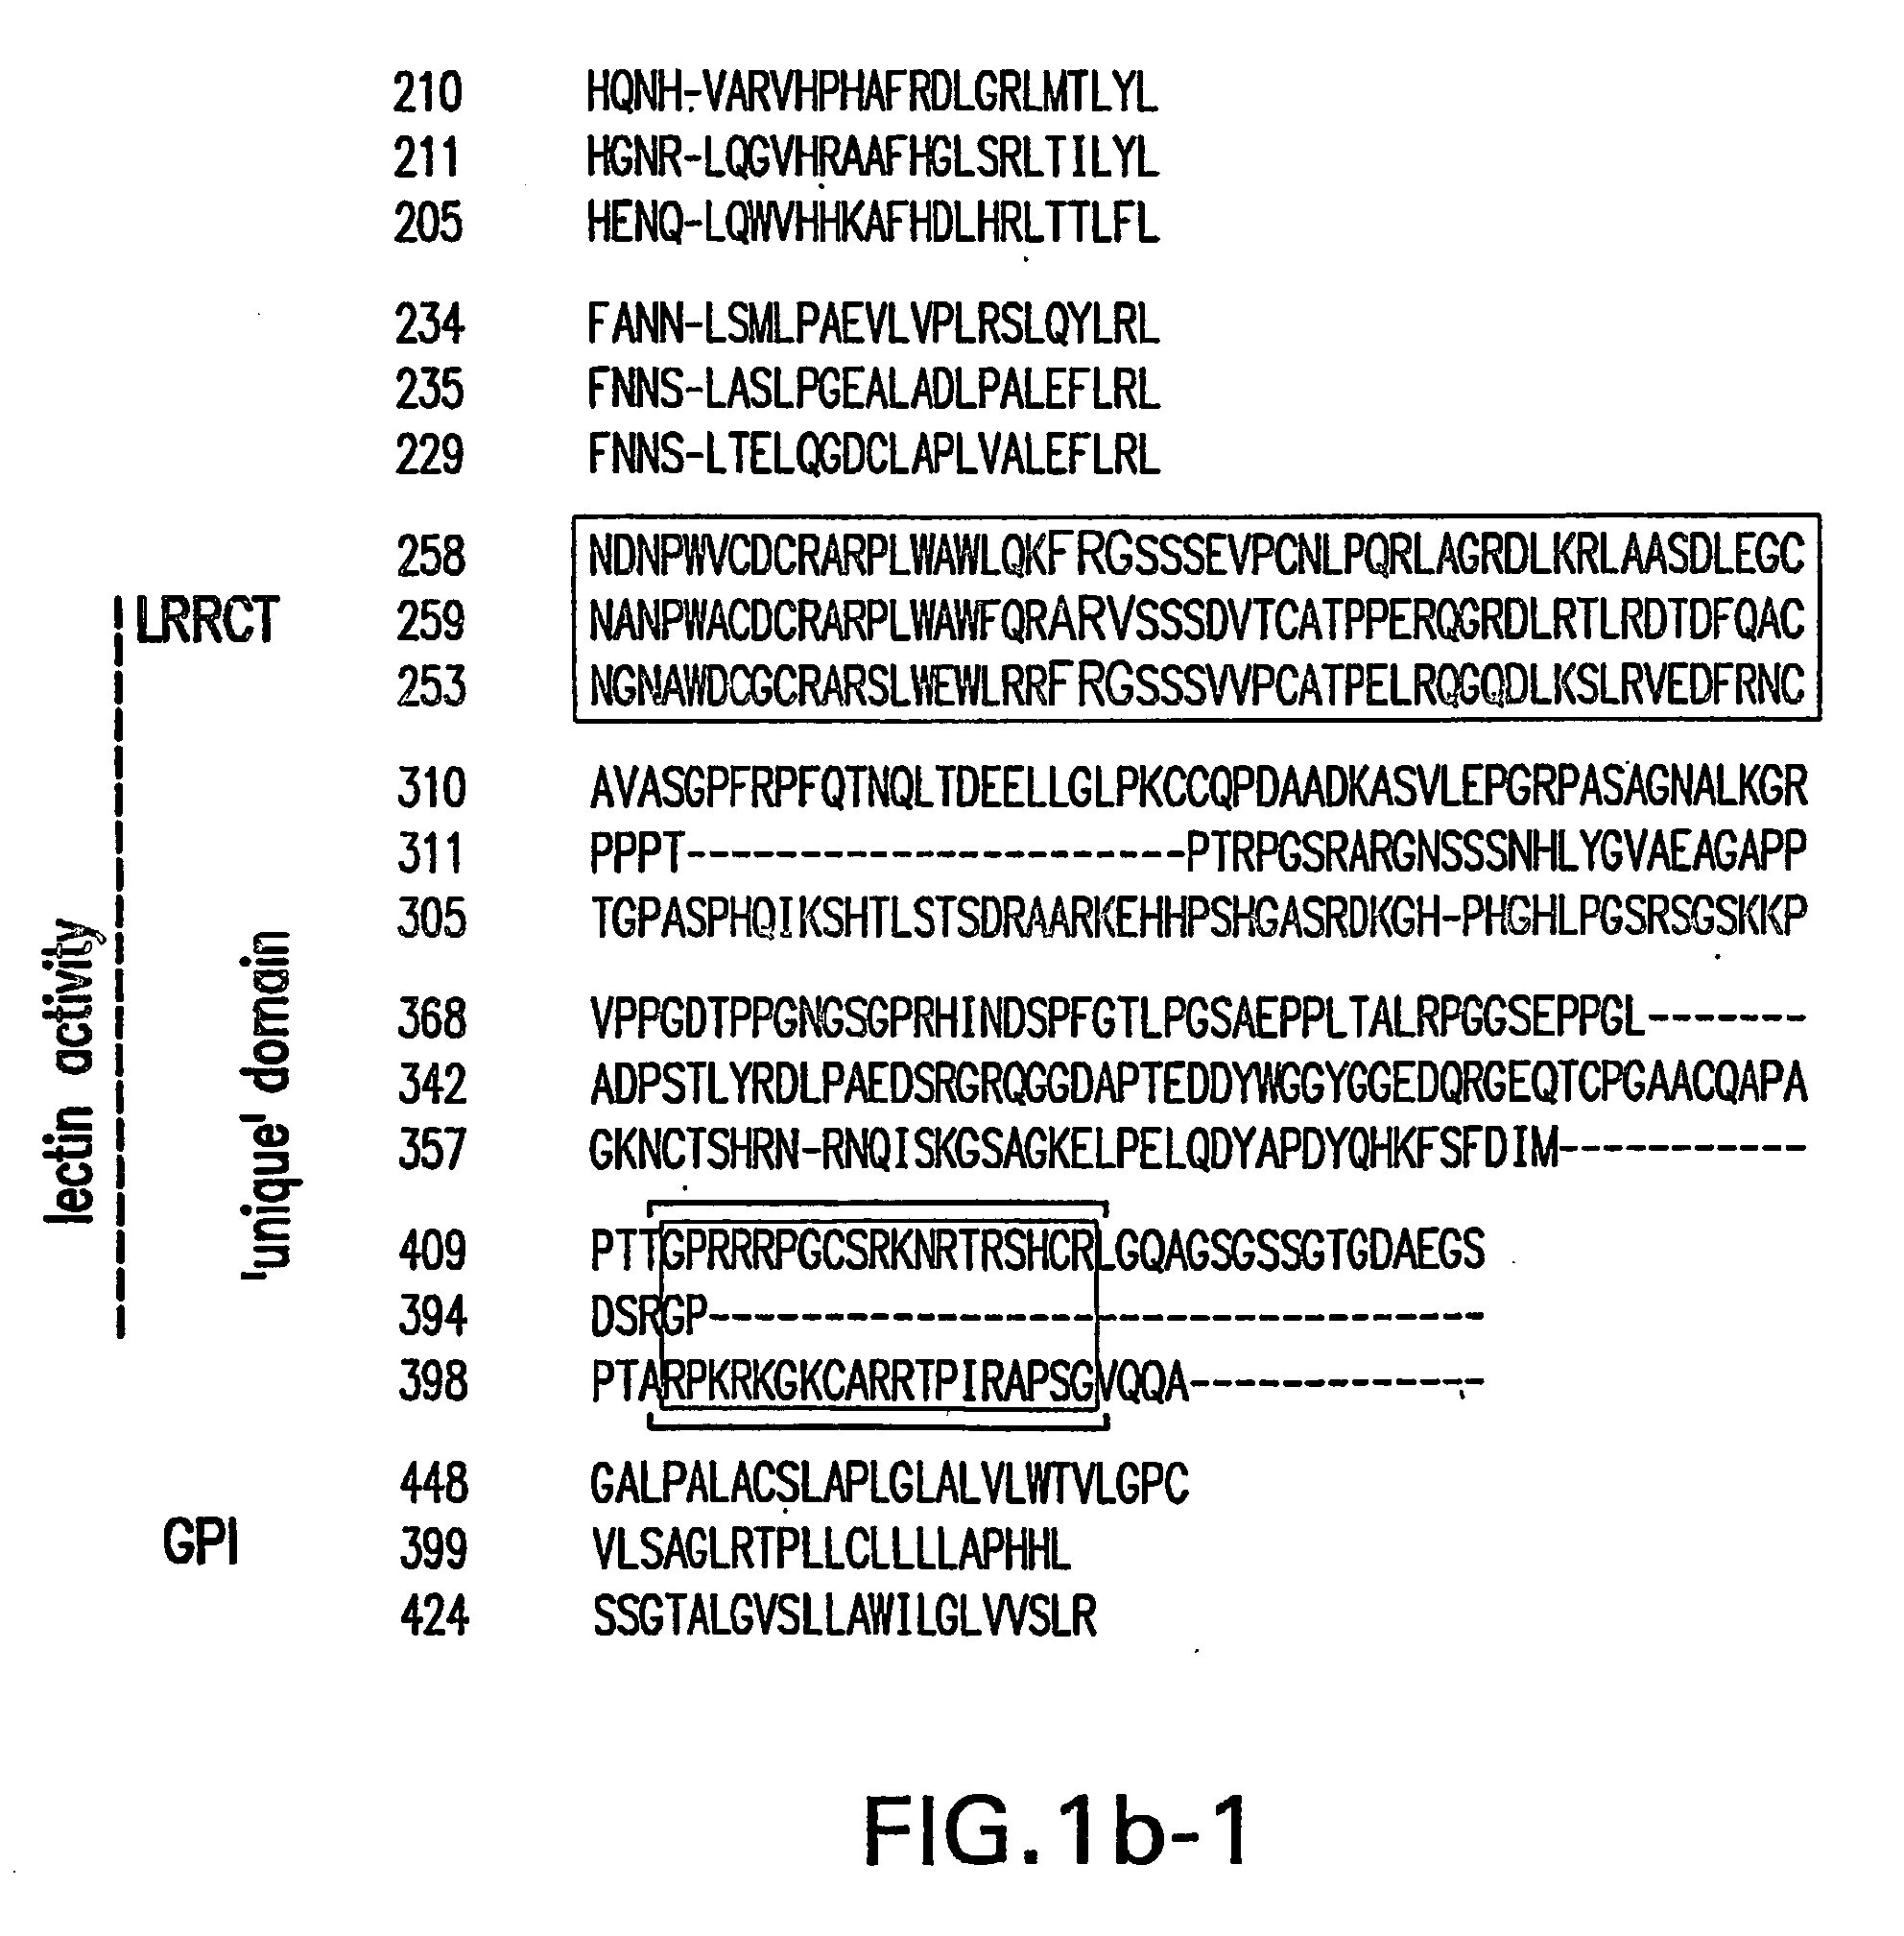 Identification of novel nogo-receptors and methods related thereto